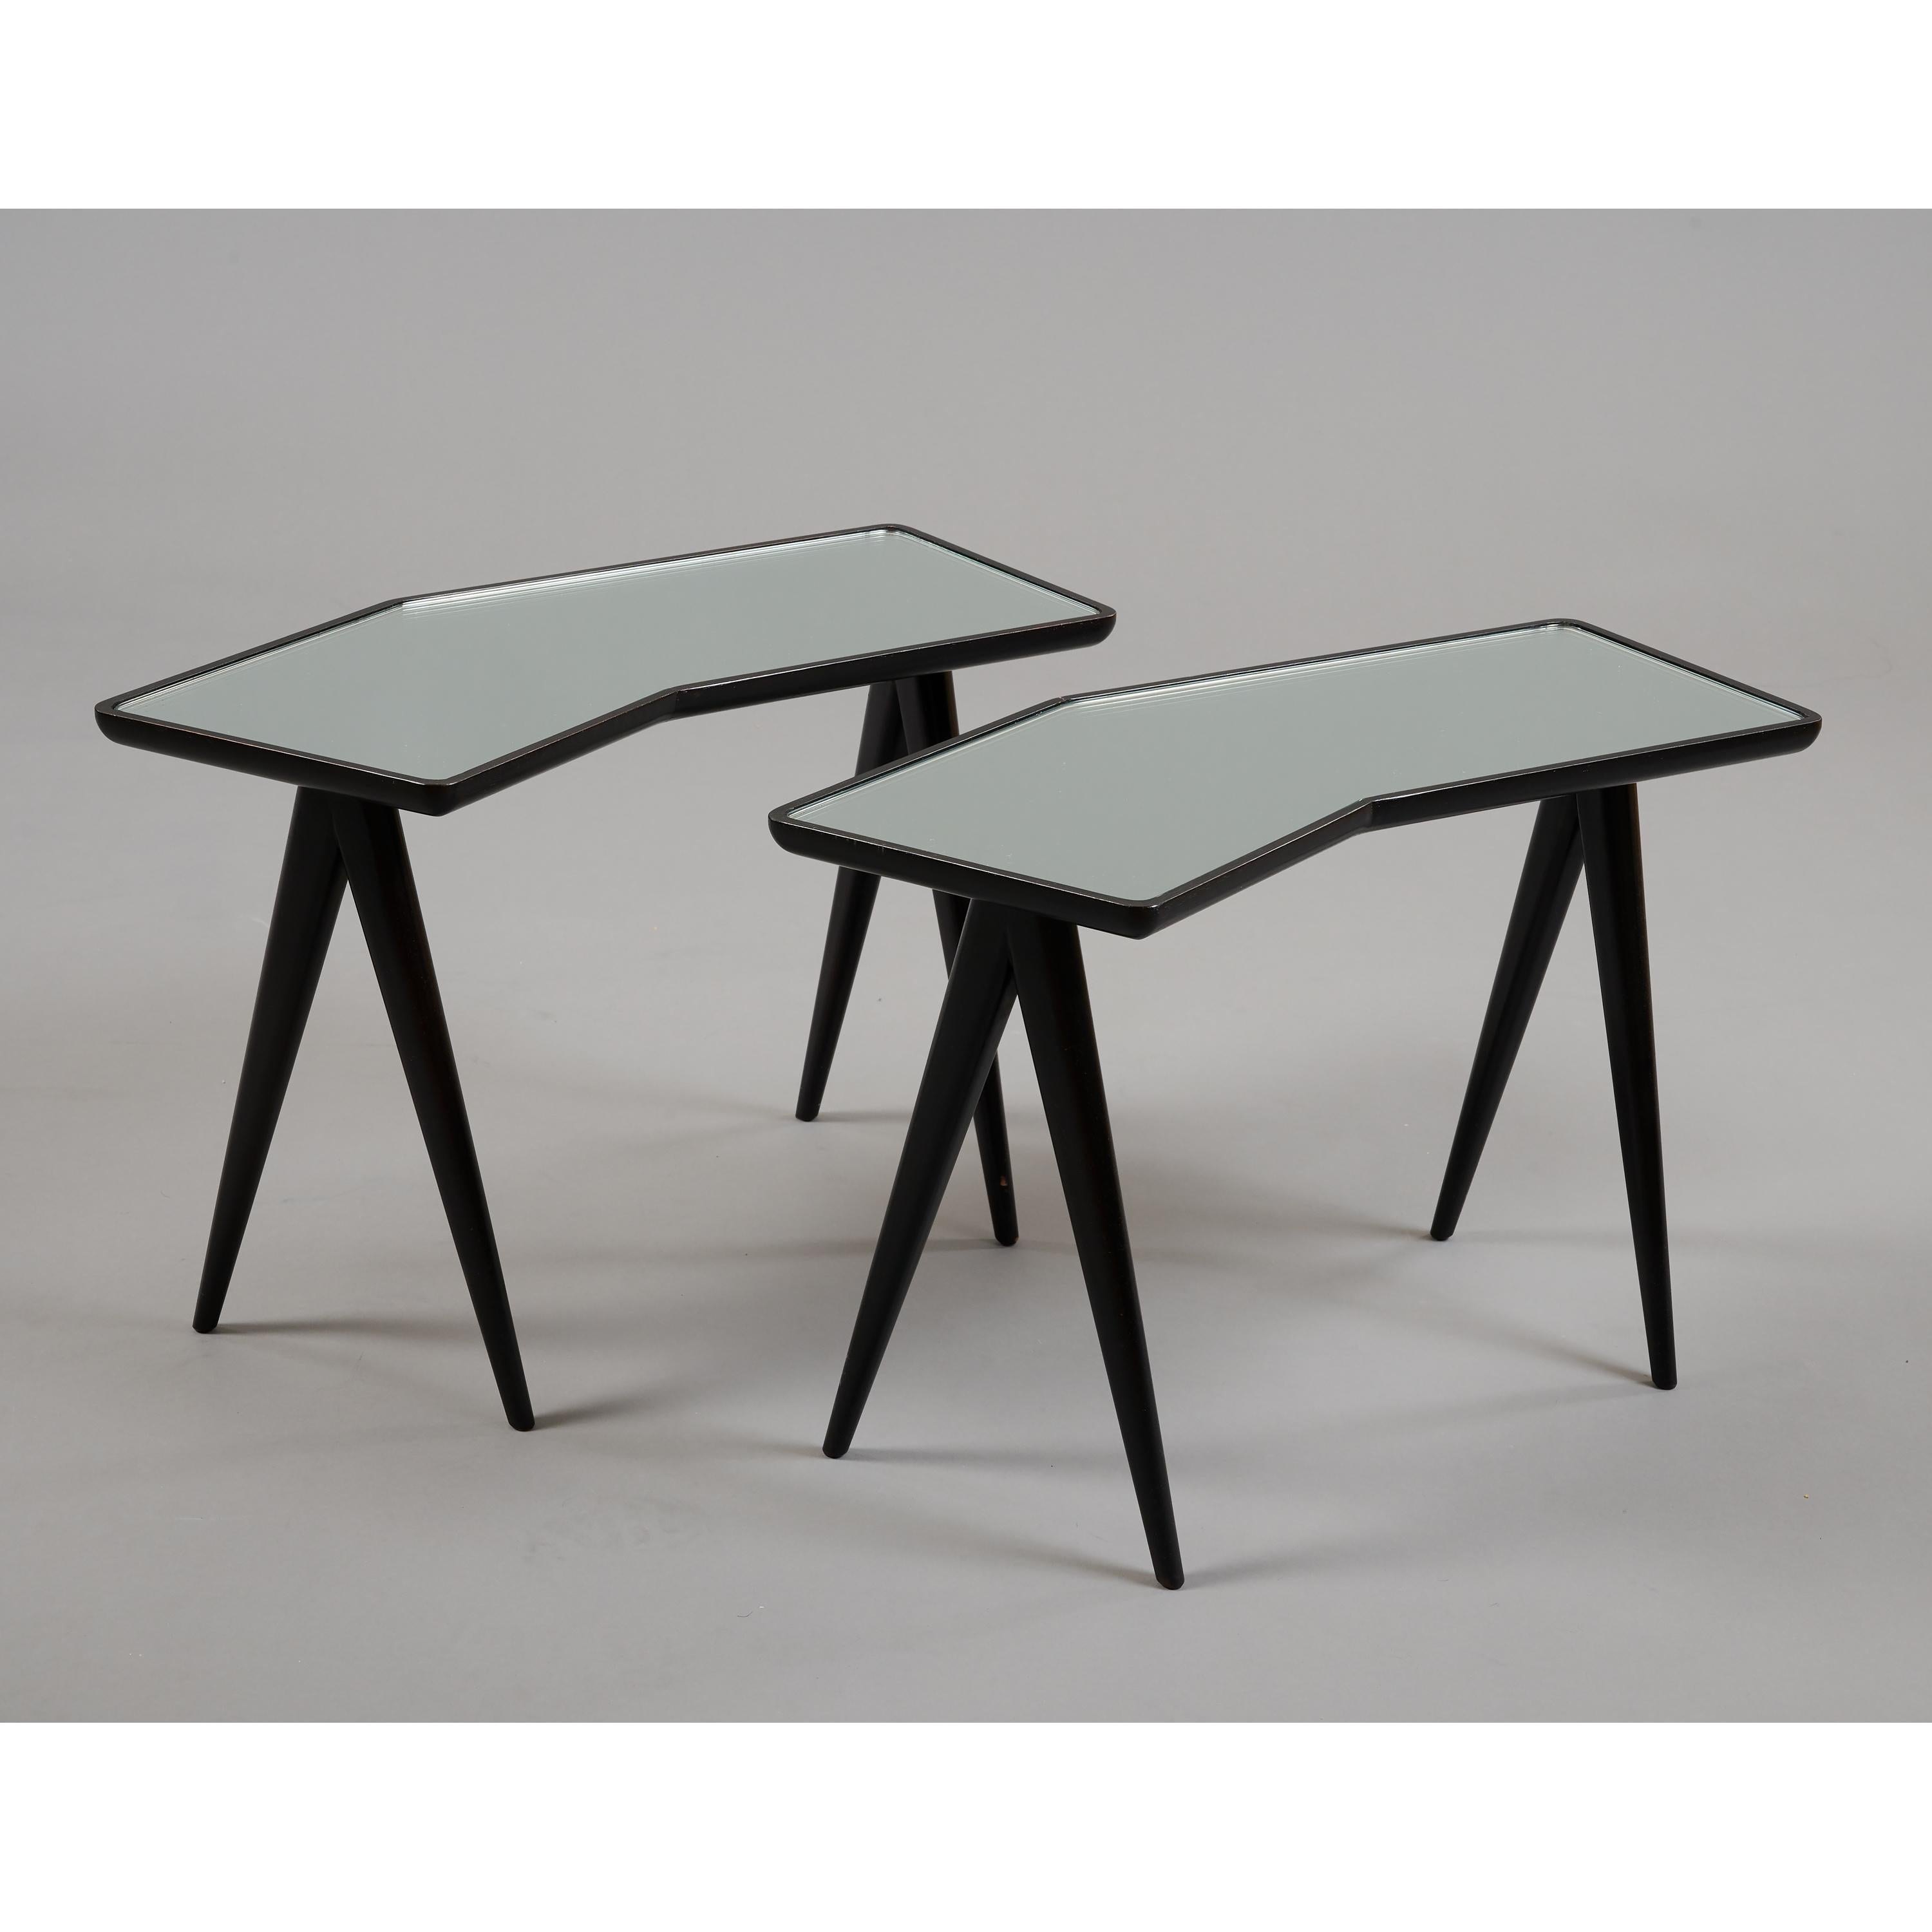 Italian Gio Ponti Pair of Geometric Nesting Tables with Mirrored Tops, Italy, 1950's For Sale